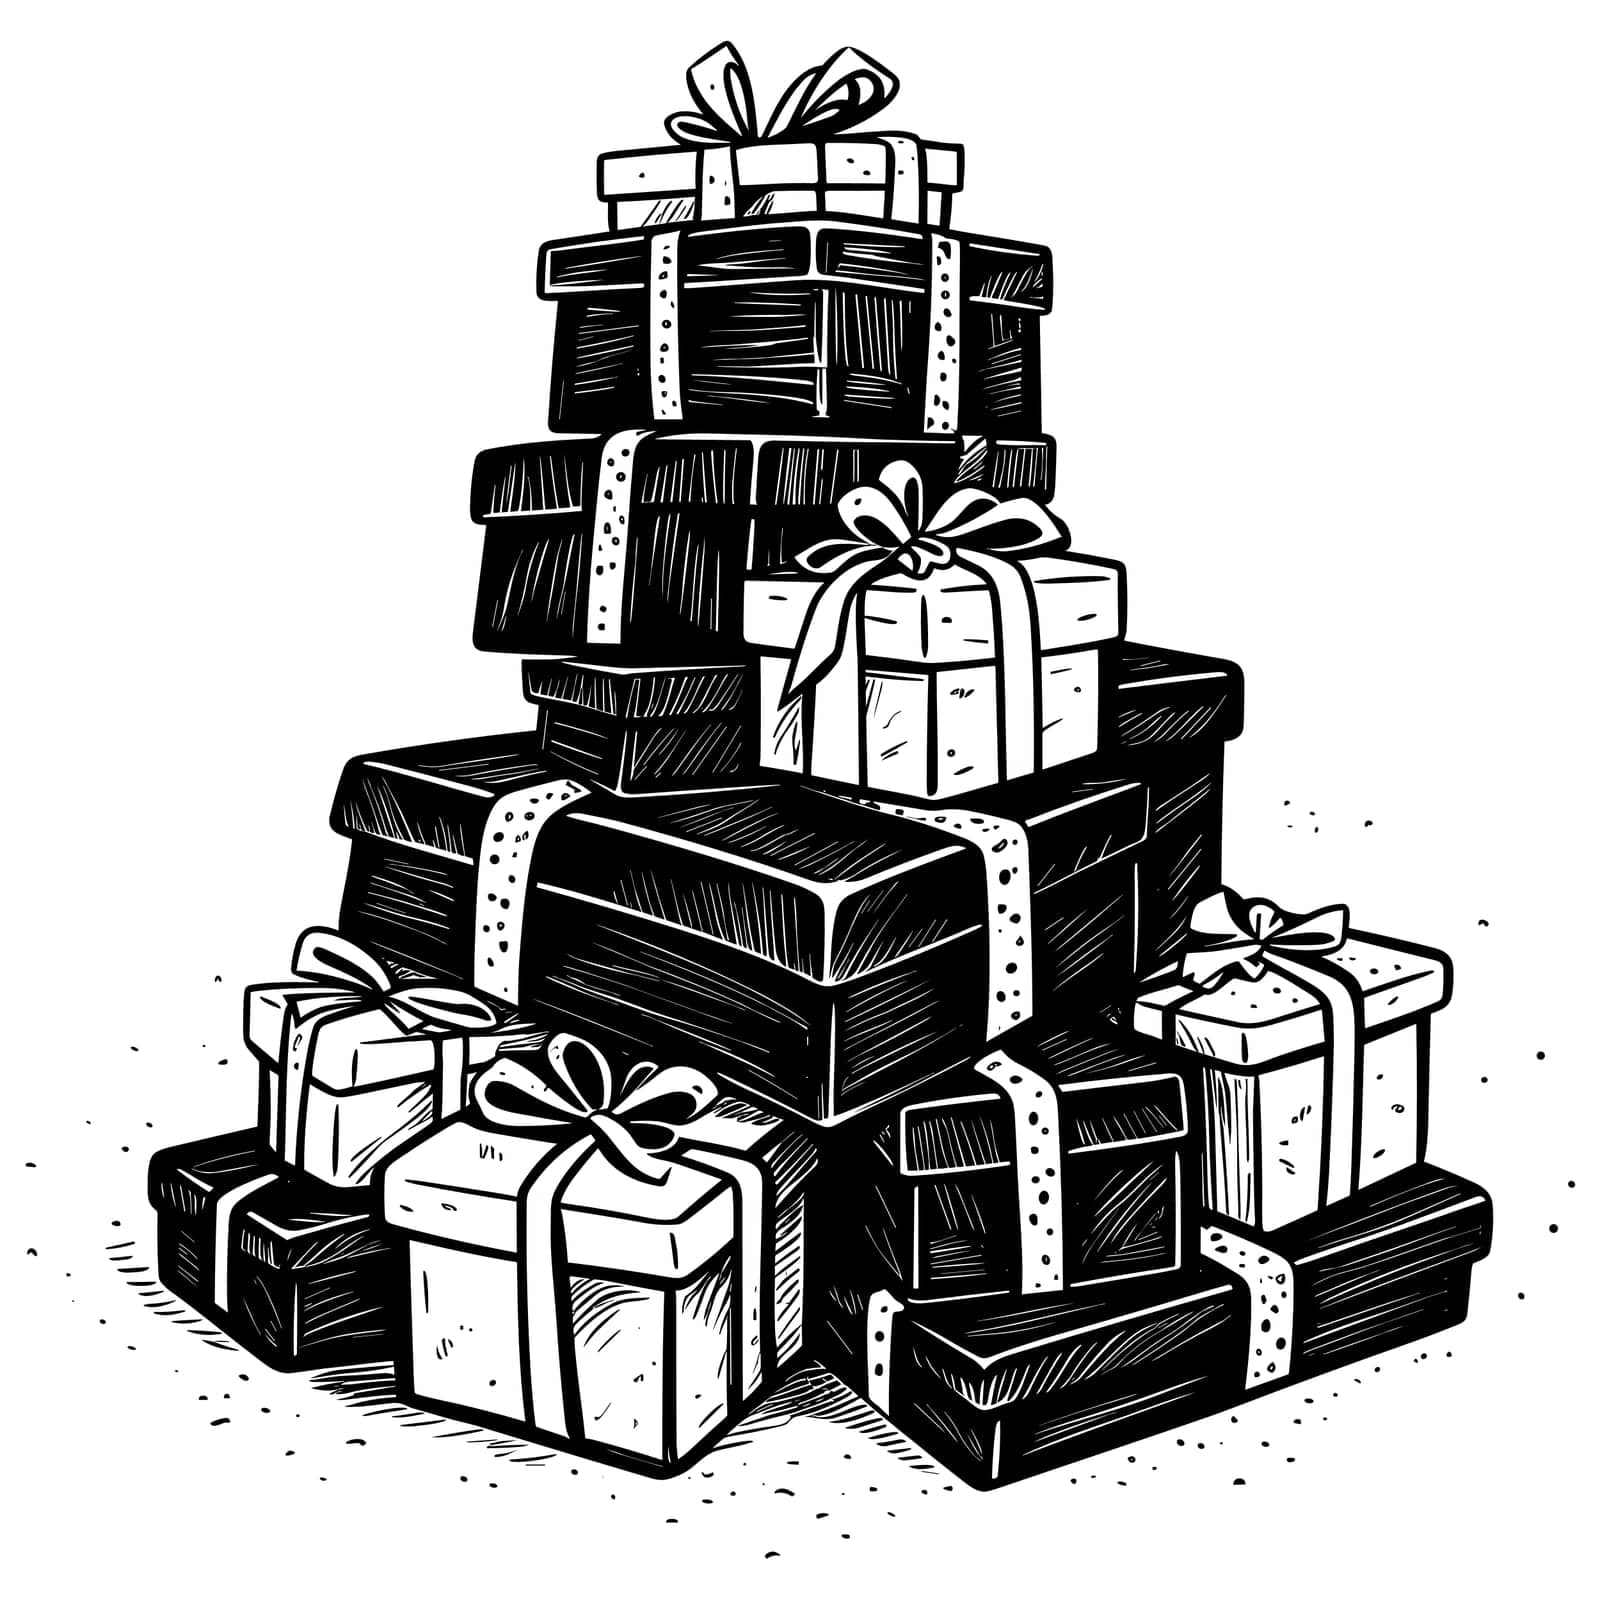 Woodcut style illustration of a pile of gift boxes.